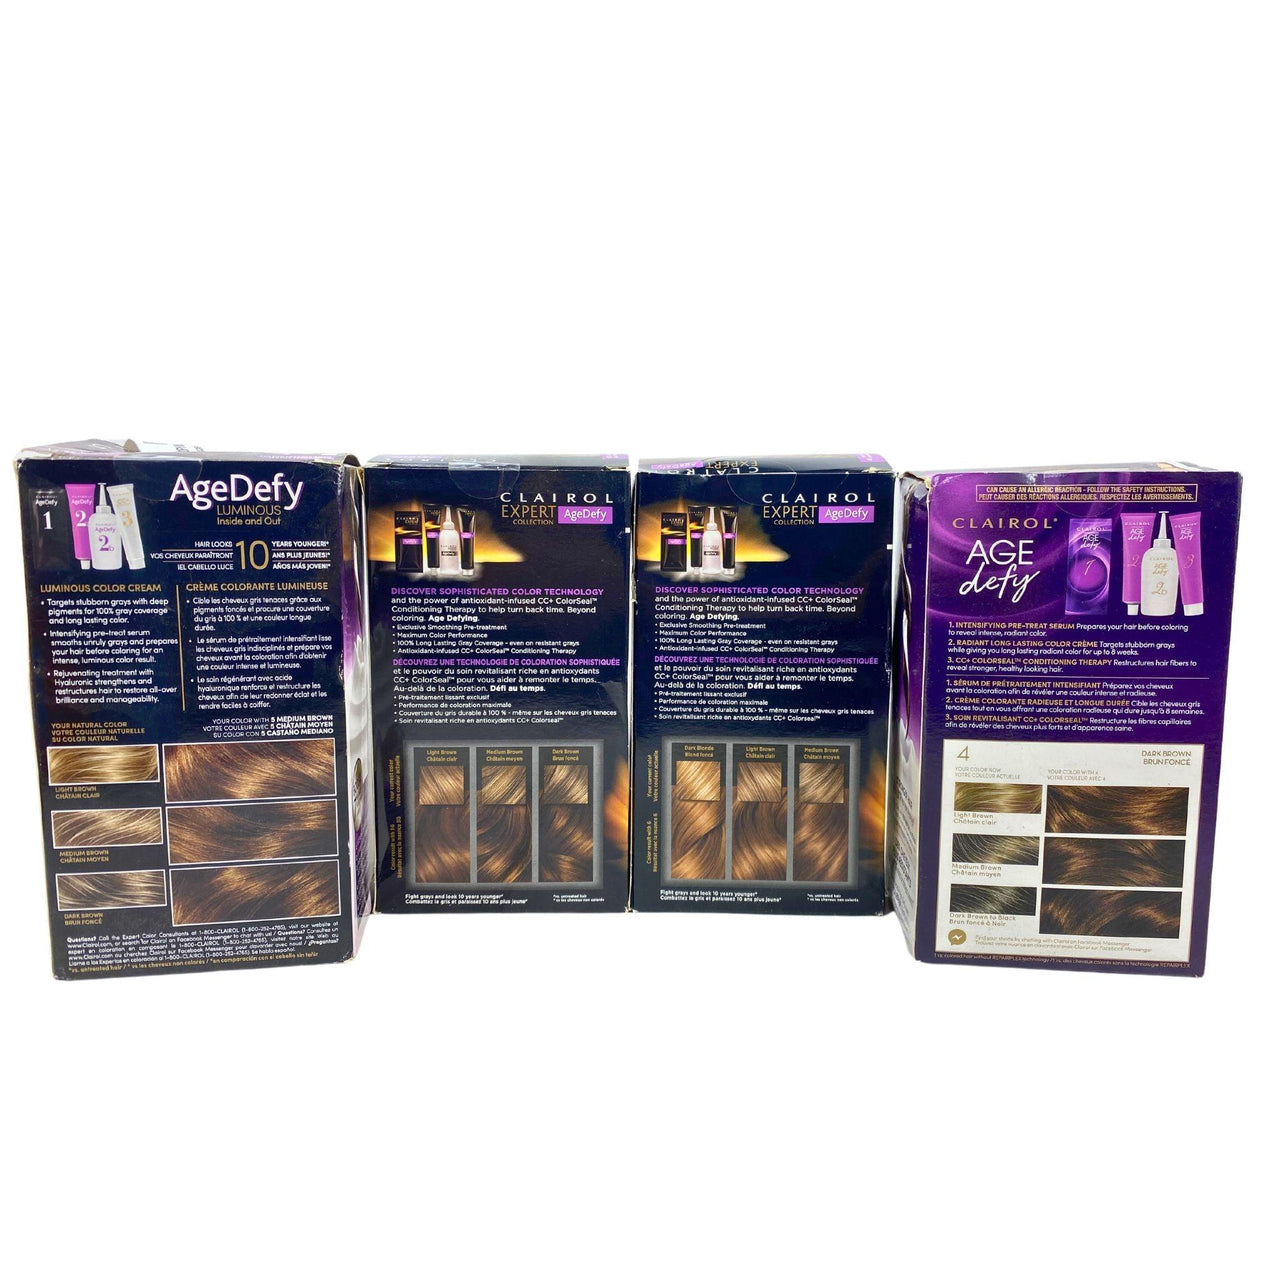 Clairol Age Defy Mix Youthful Radiant Color (50 Pcs Lot) - Discount Wholesalers Inc